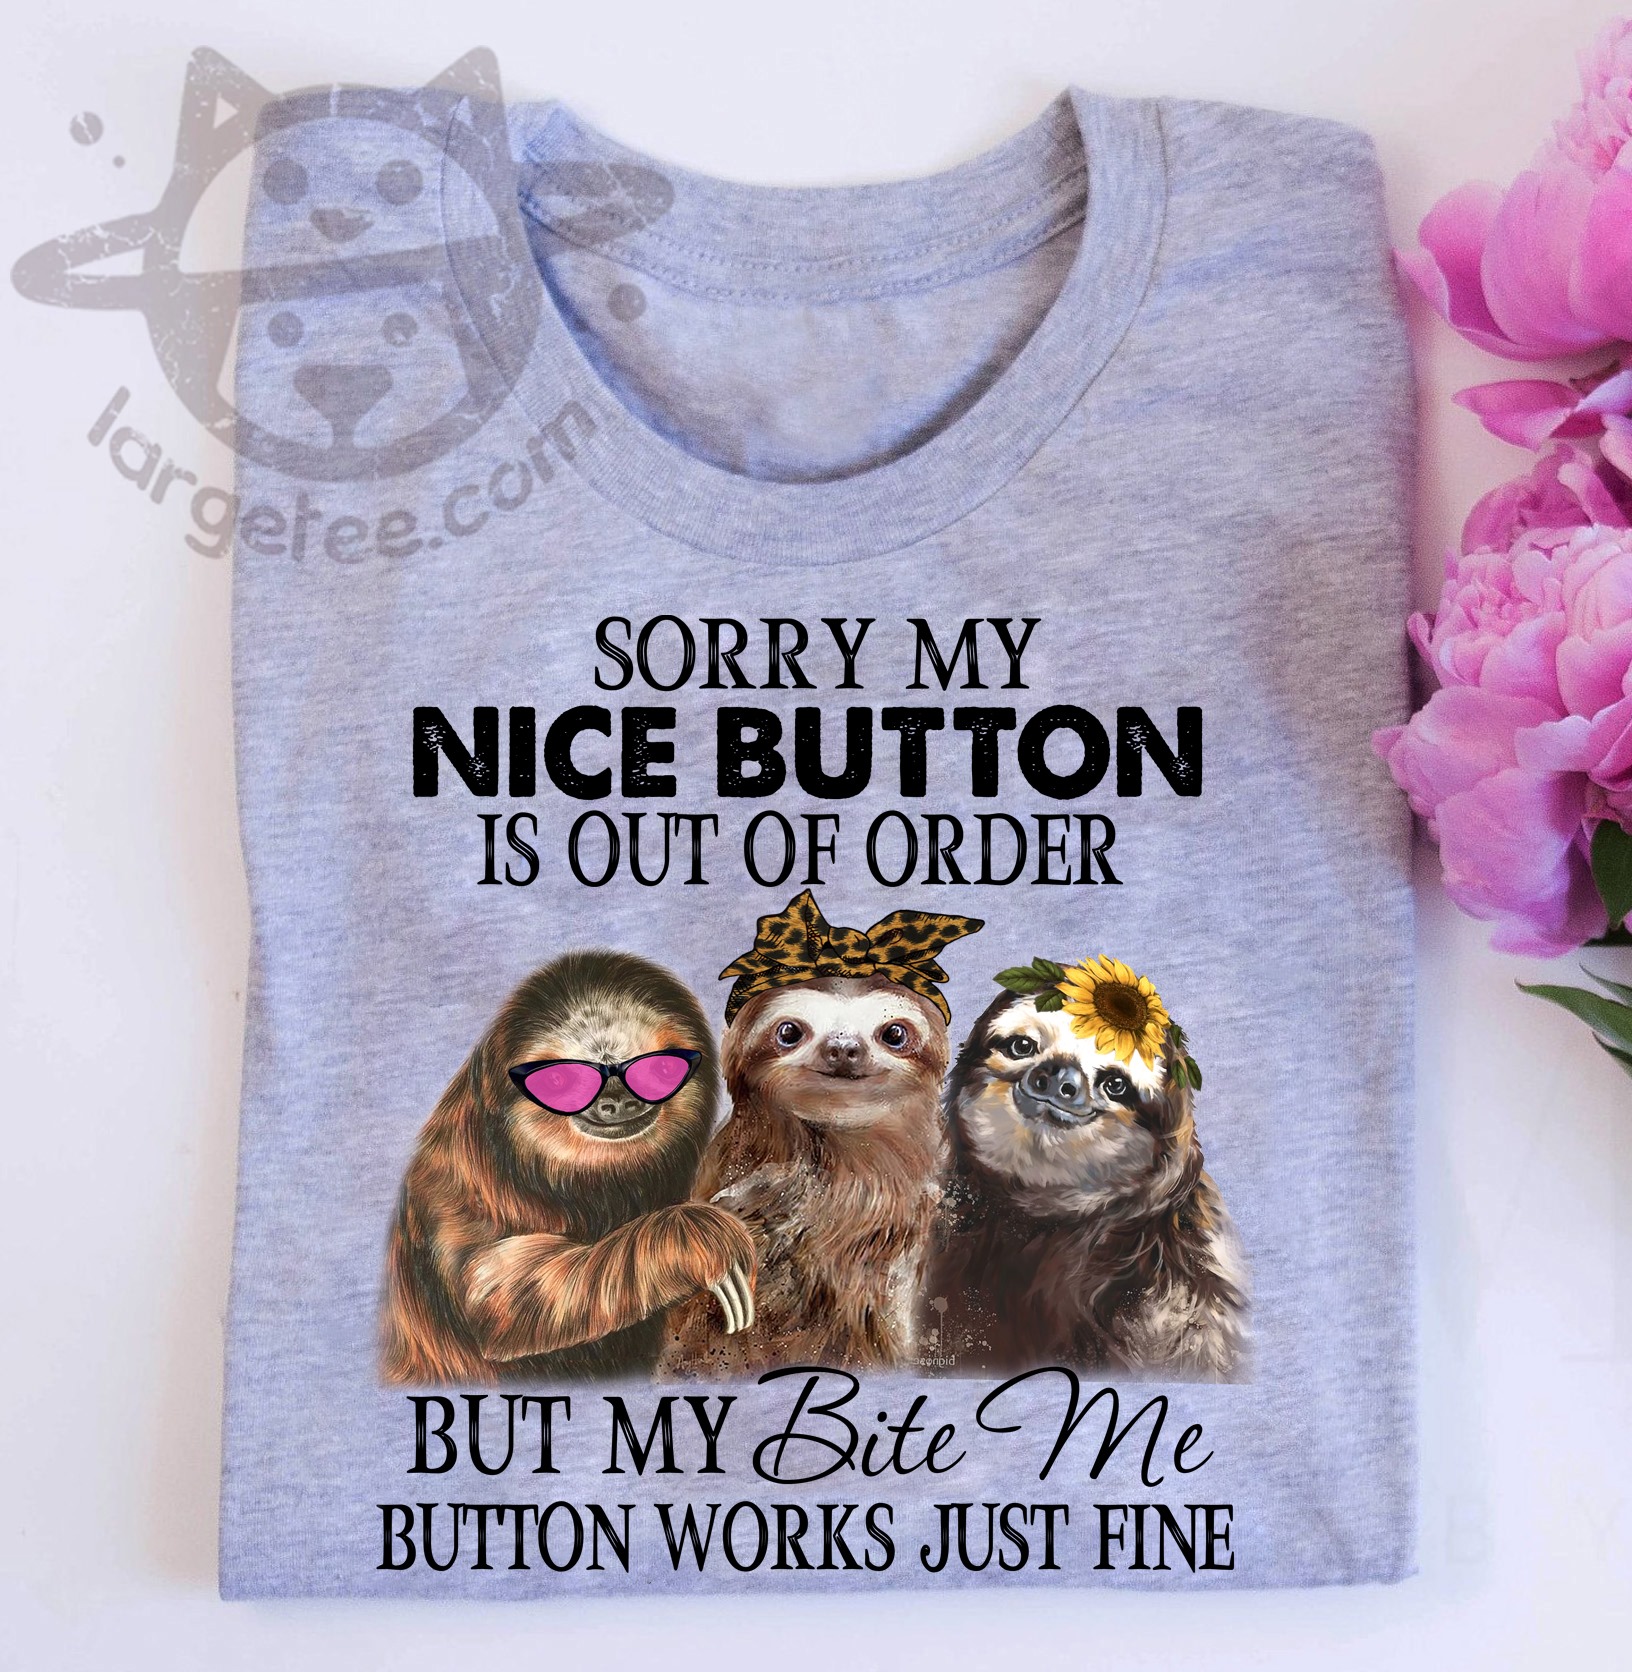 Sorry my nice button is out of order but my bite me button works just fine - Sloth